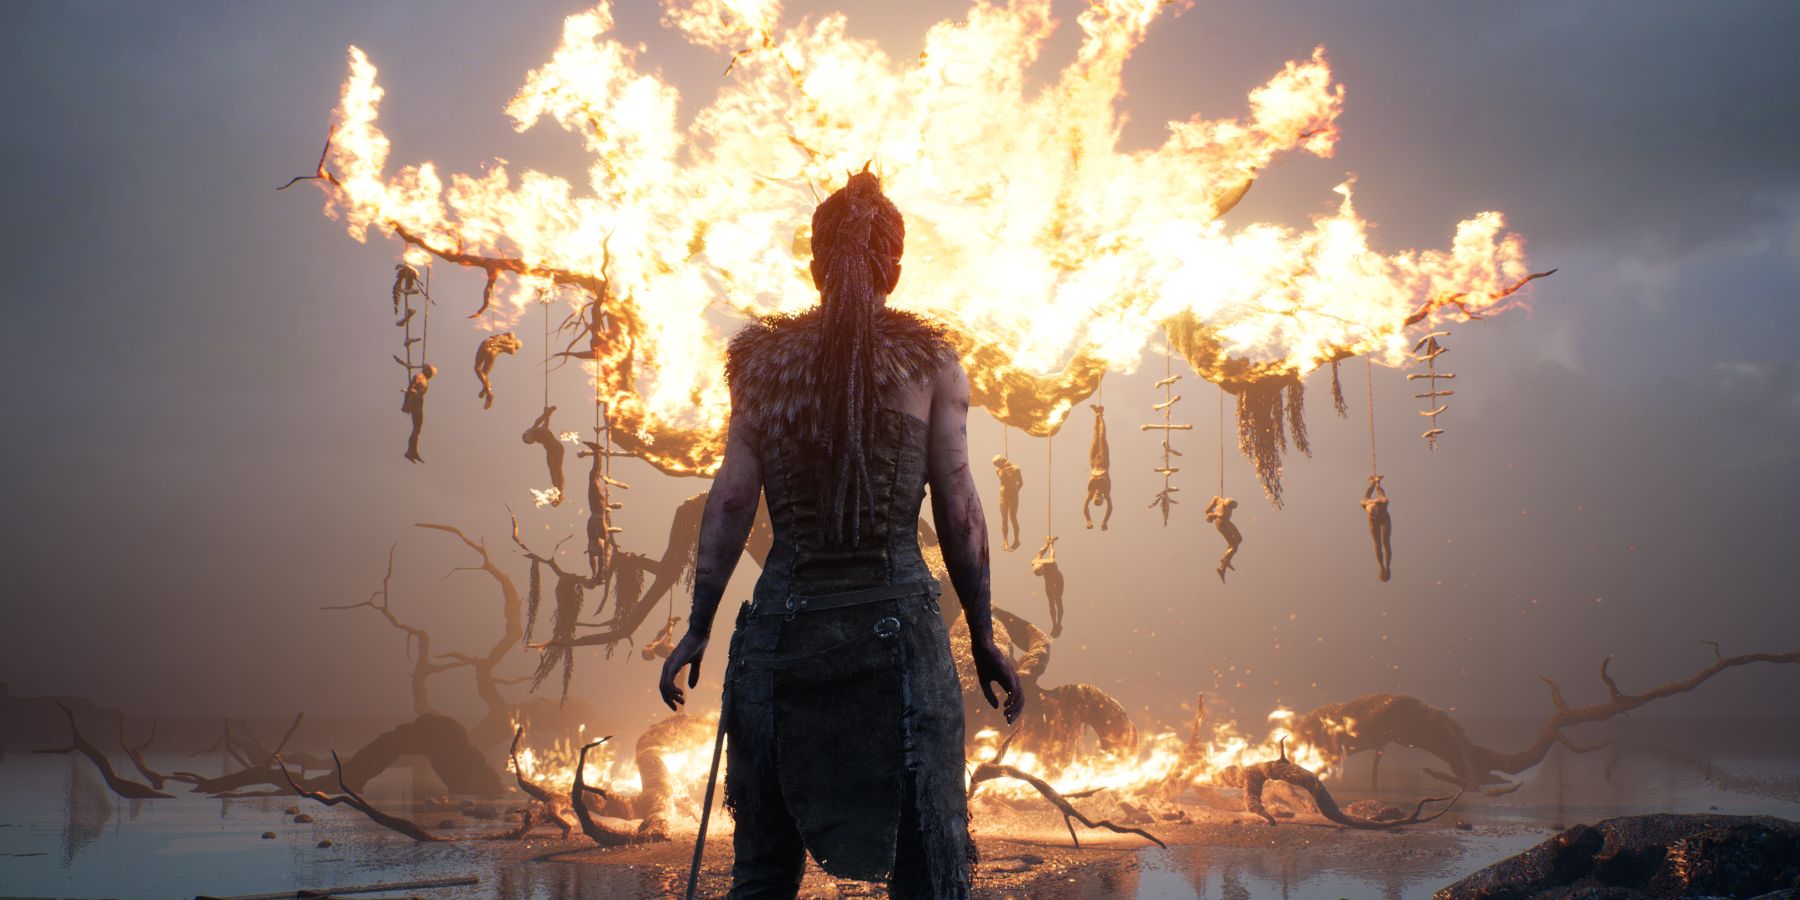 Will Hellblade 2 Release In 2023? - The Signs Are Looking Good